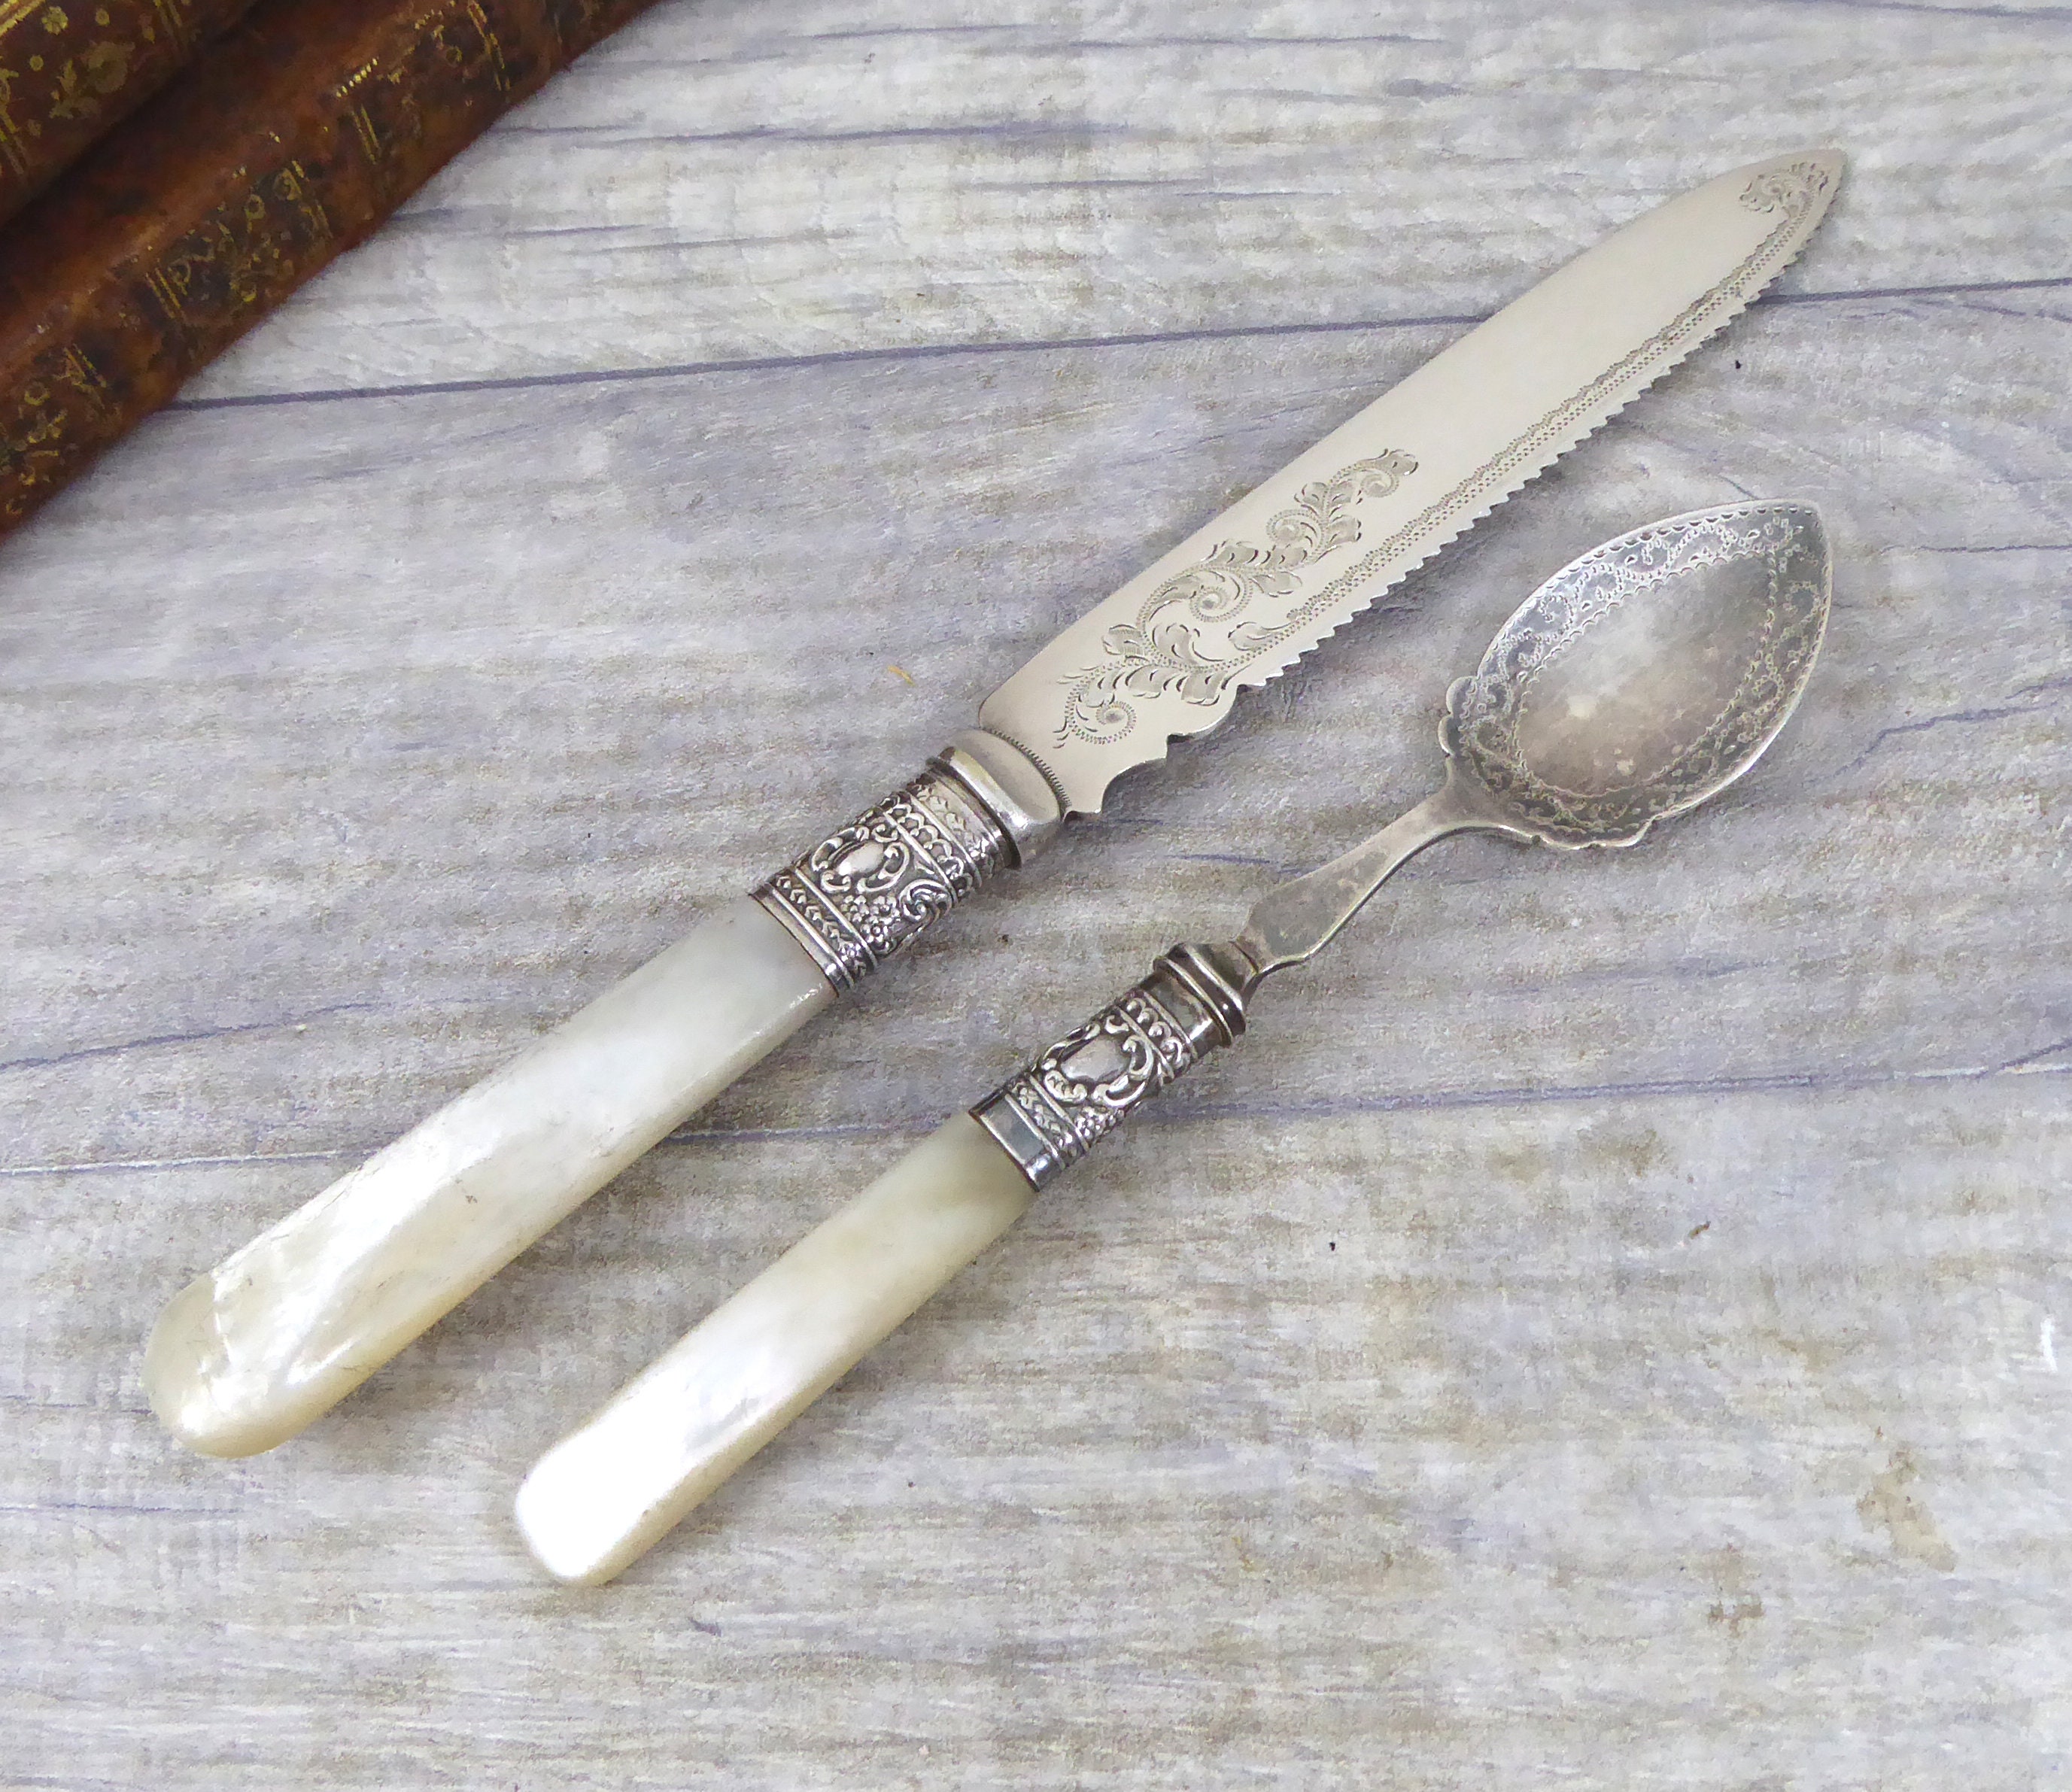 Group Of 3 Vintage Fishing Lures And Mother Of Pearl Pocket Knife